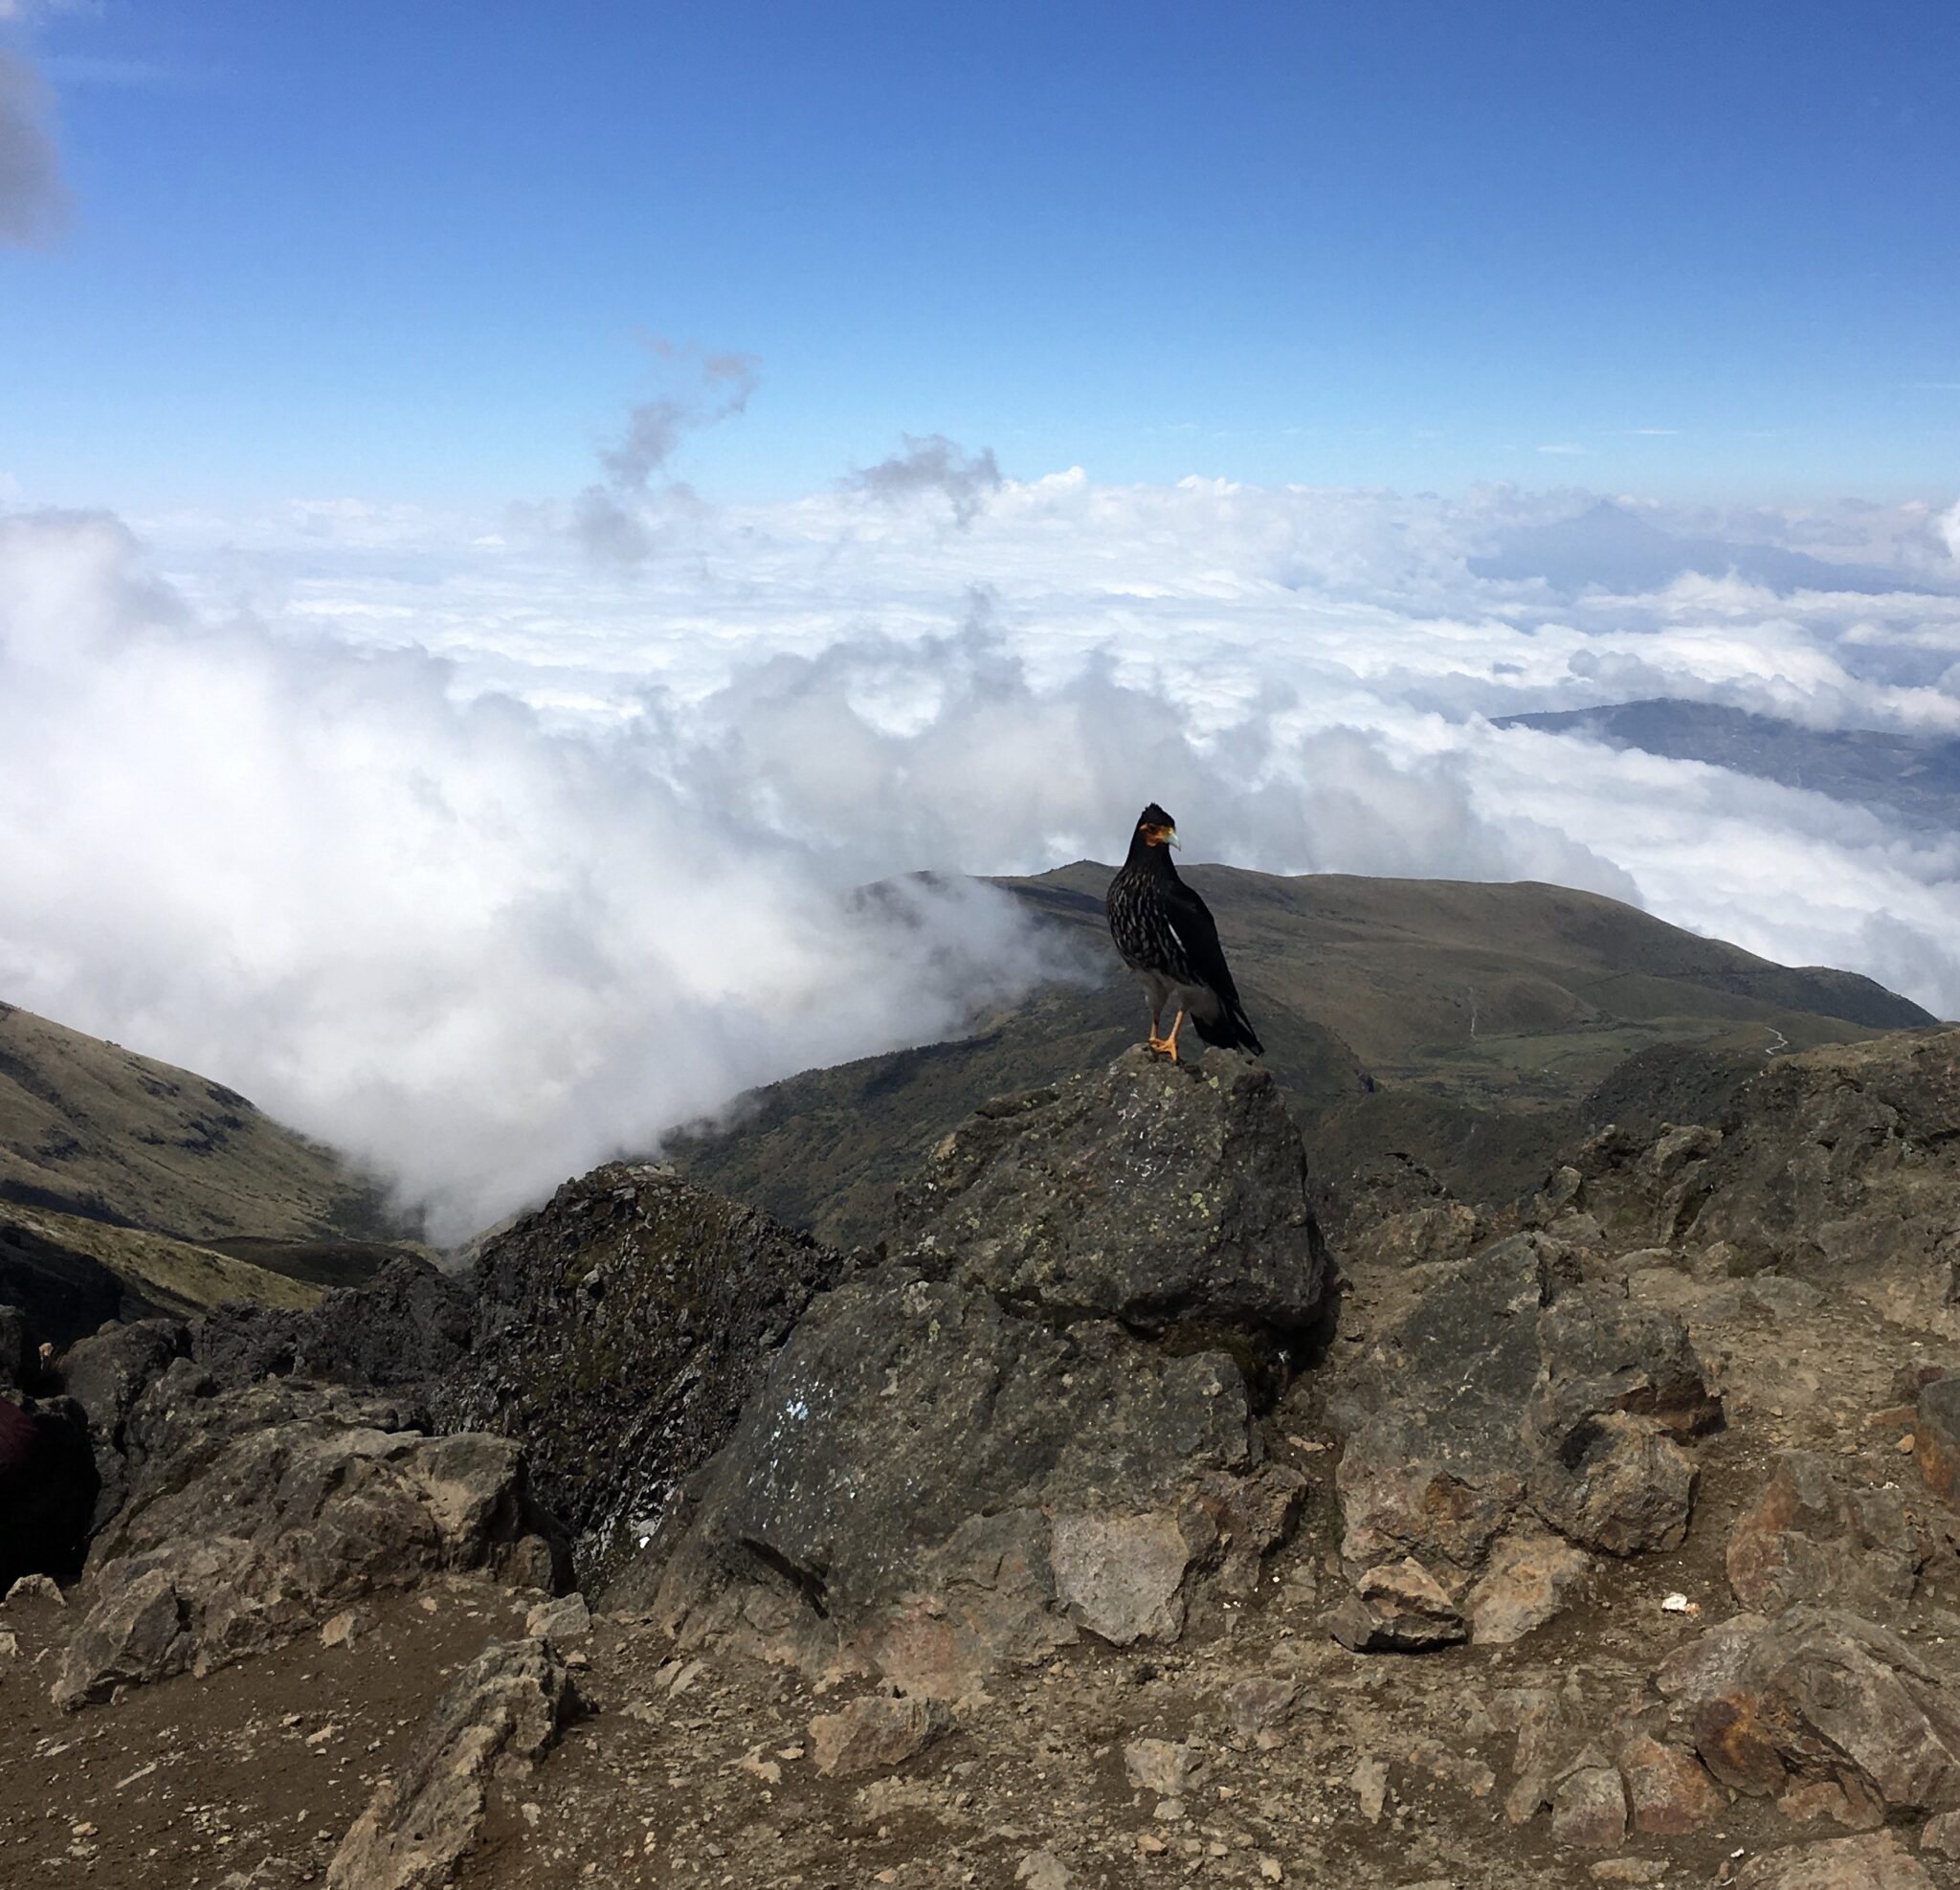 A Curiquingue bird perched on the summit of Ruku Pinicha, above the clouds
